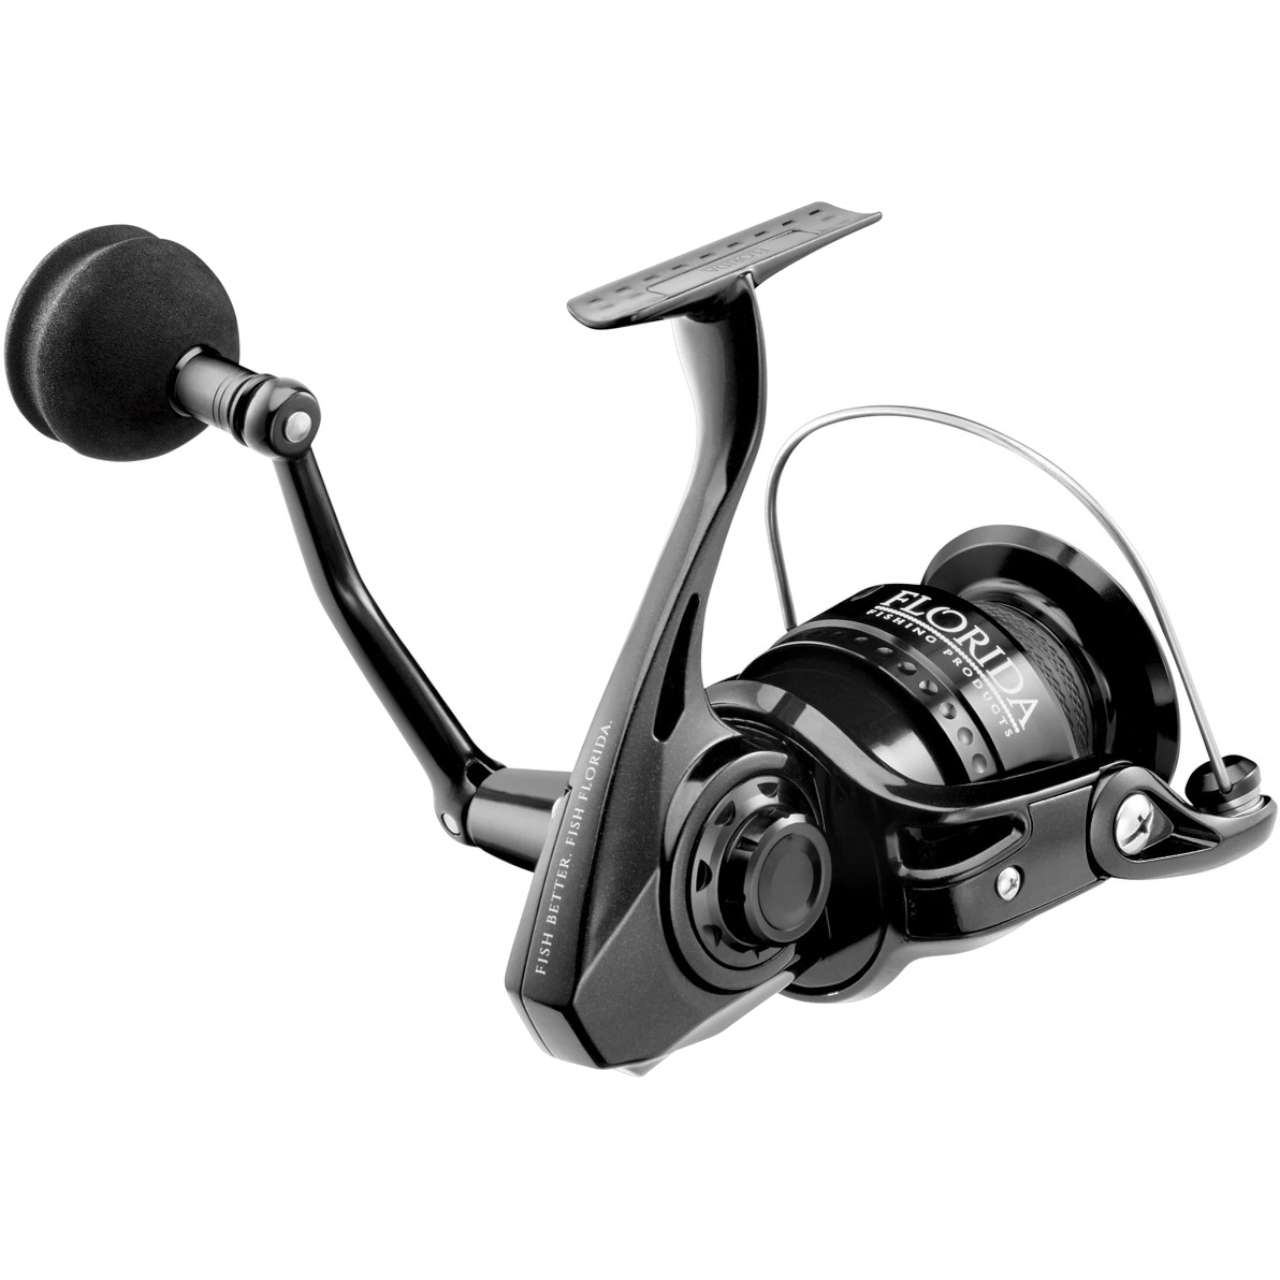 Florida Fishing Products Resolute 6000 Spinning Reel - TackleDirect